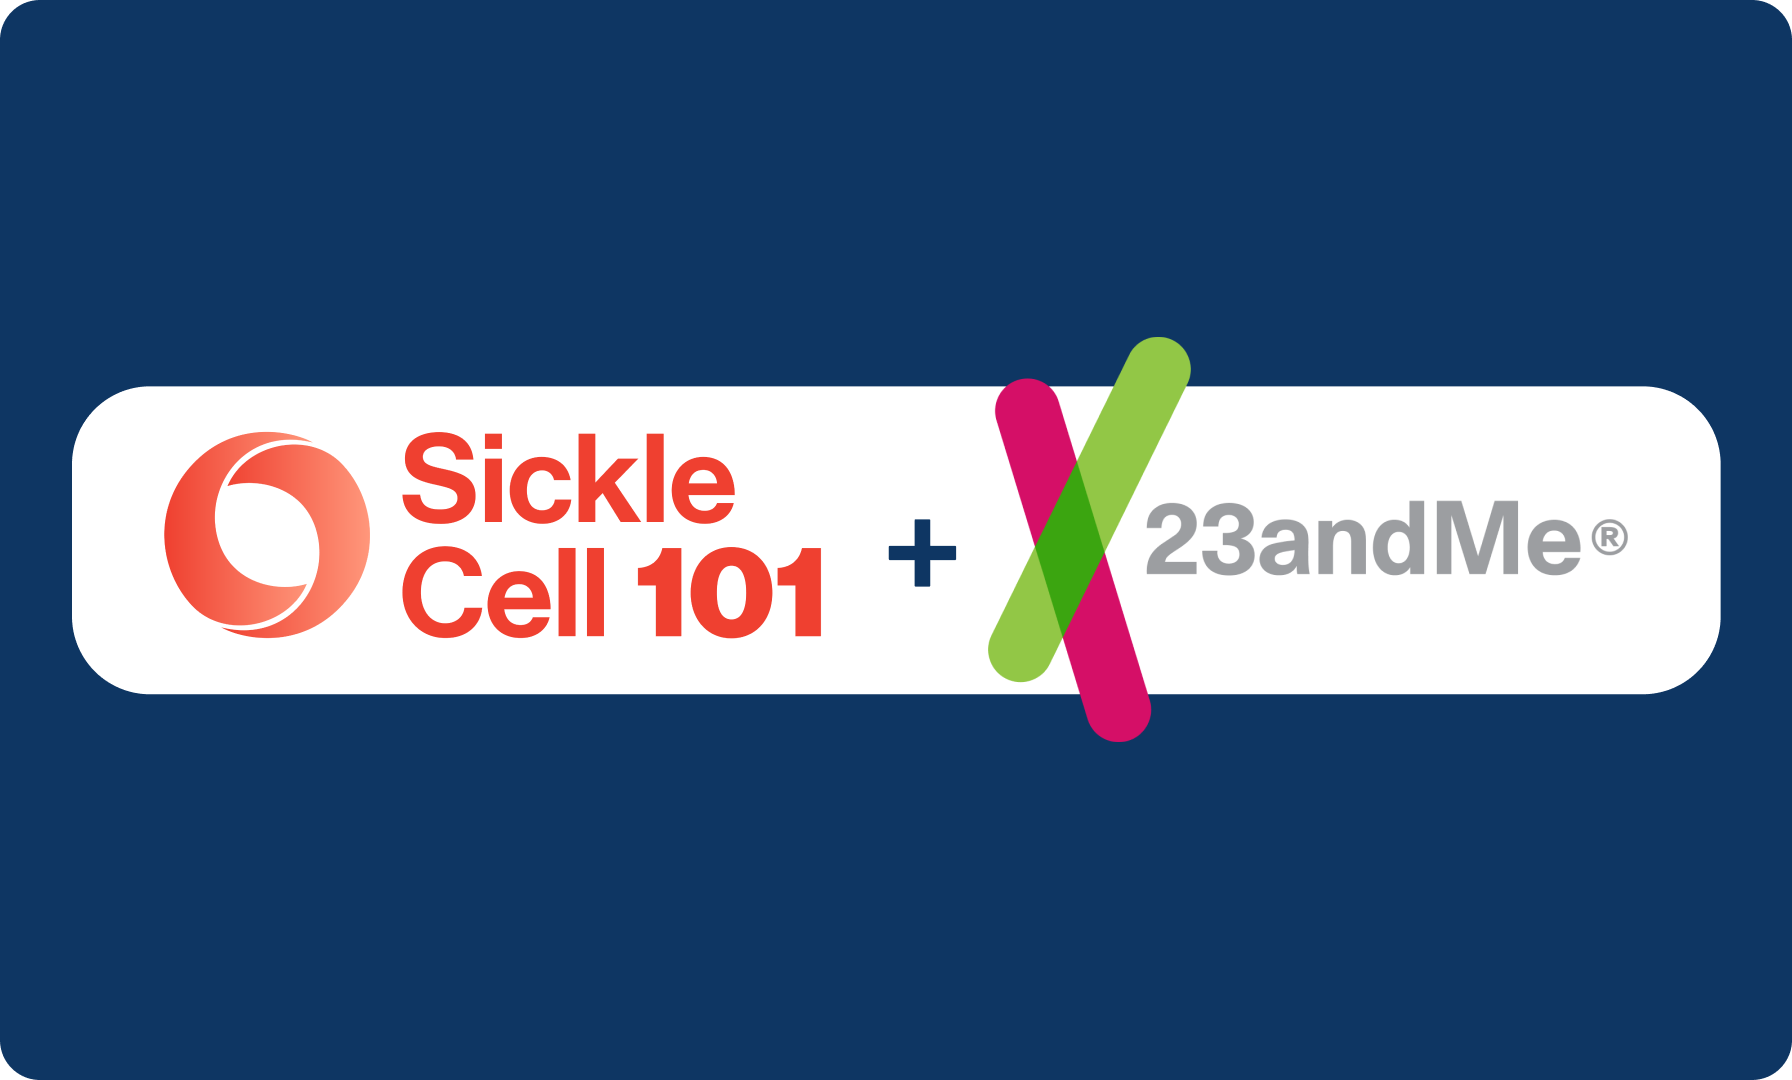 Sickle Cell 101 and 23andMe Collaborate to Expand Sickle Cell Trait Awareness Campaign